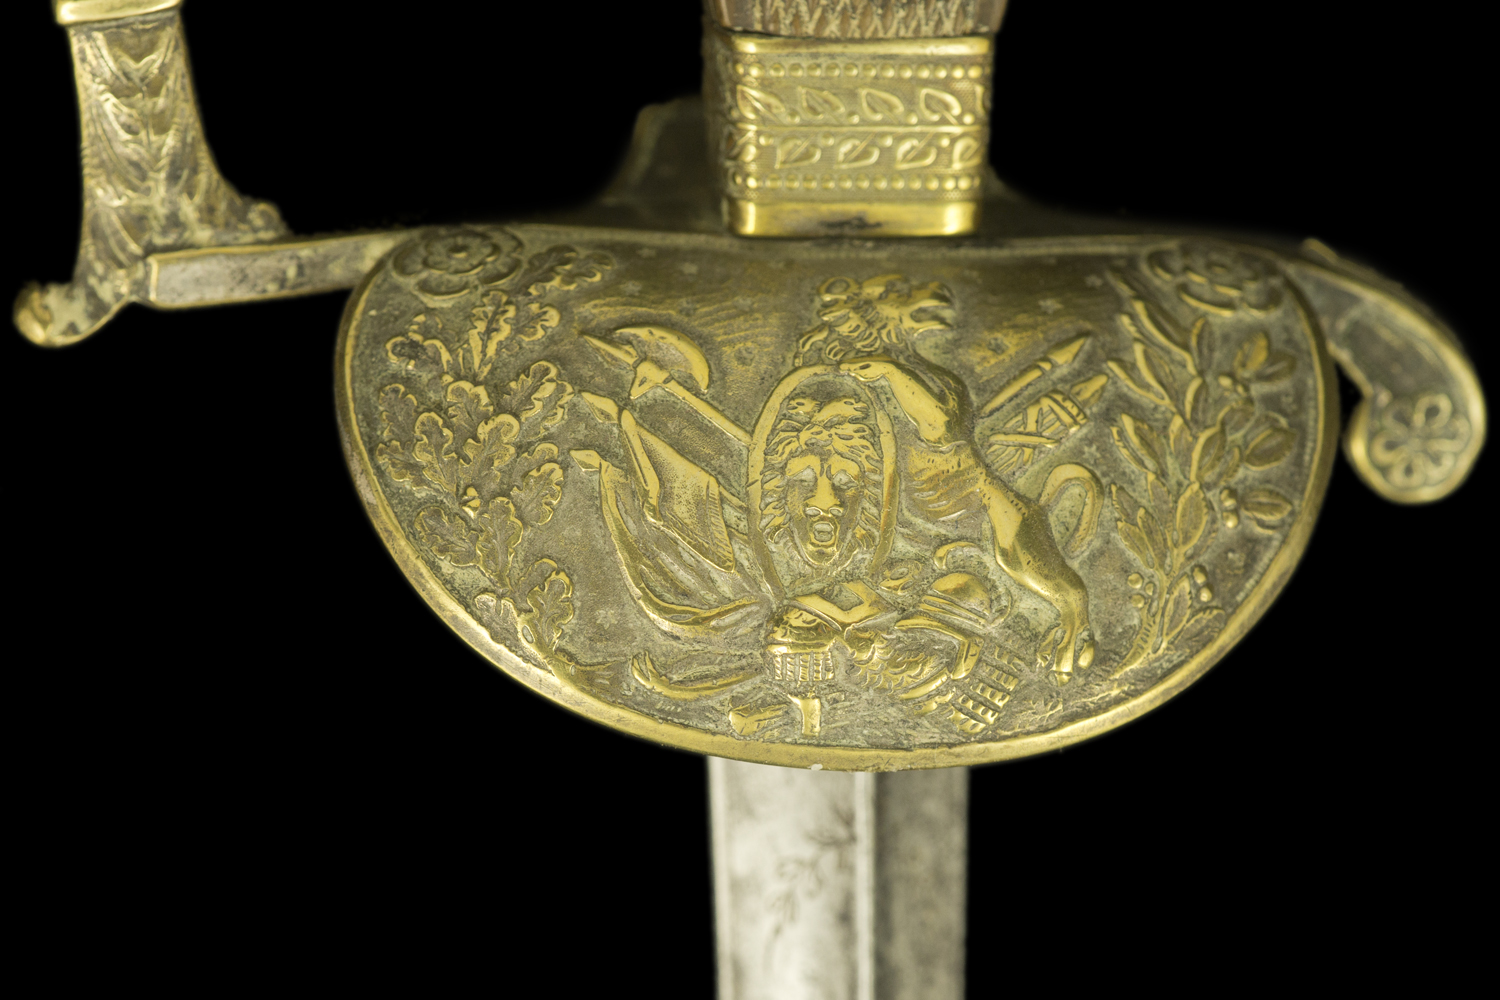 S000216_French_Court_Smallsword_Detail_Shell_Obverse